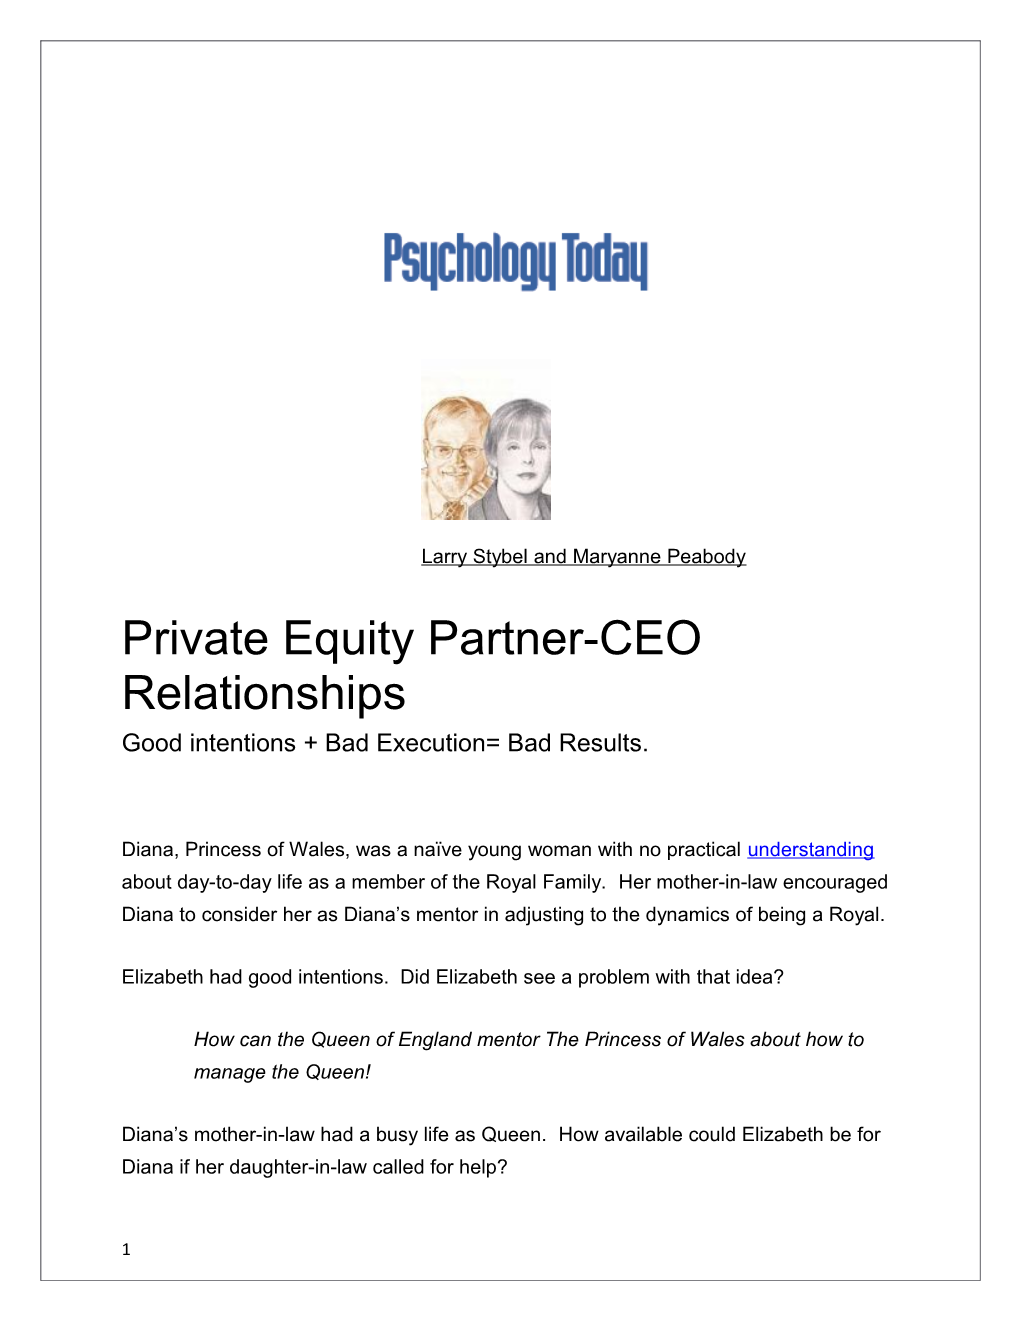 Private Equity Partner-CEO Relationships